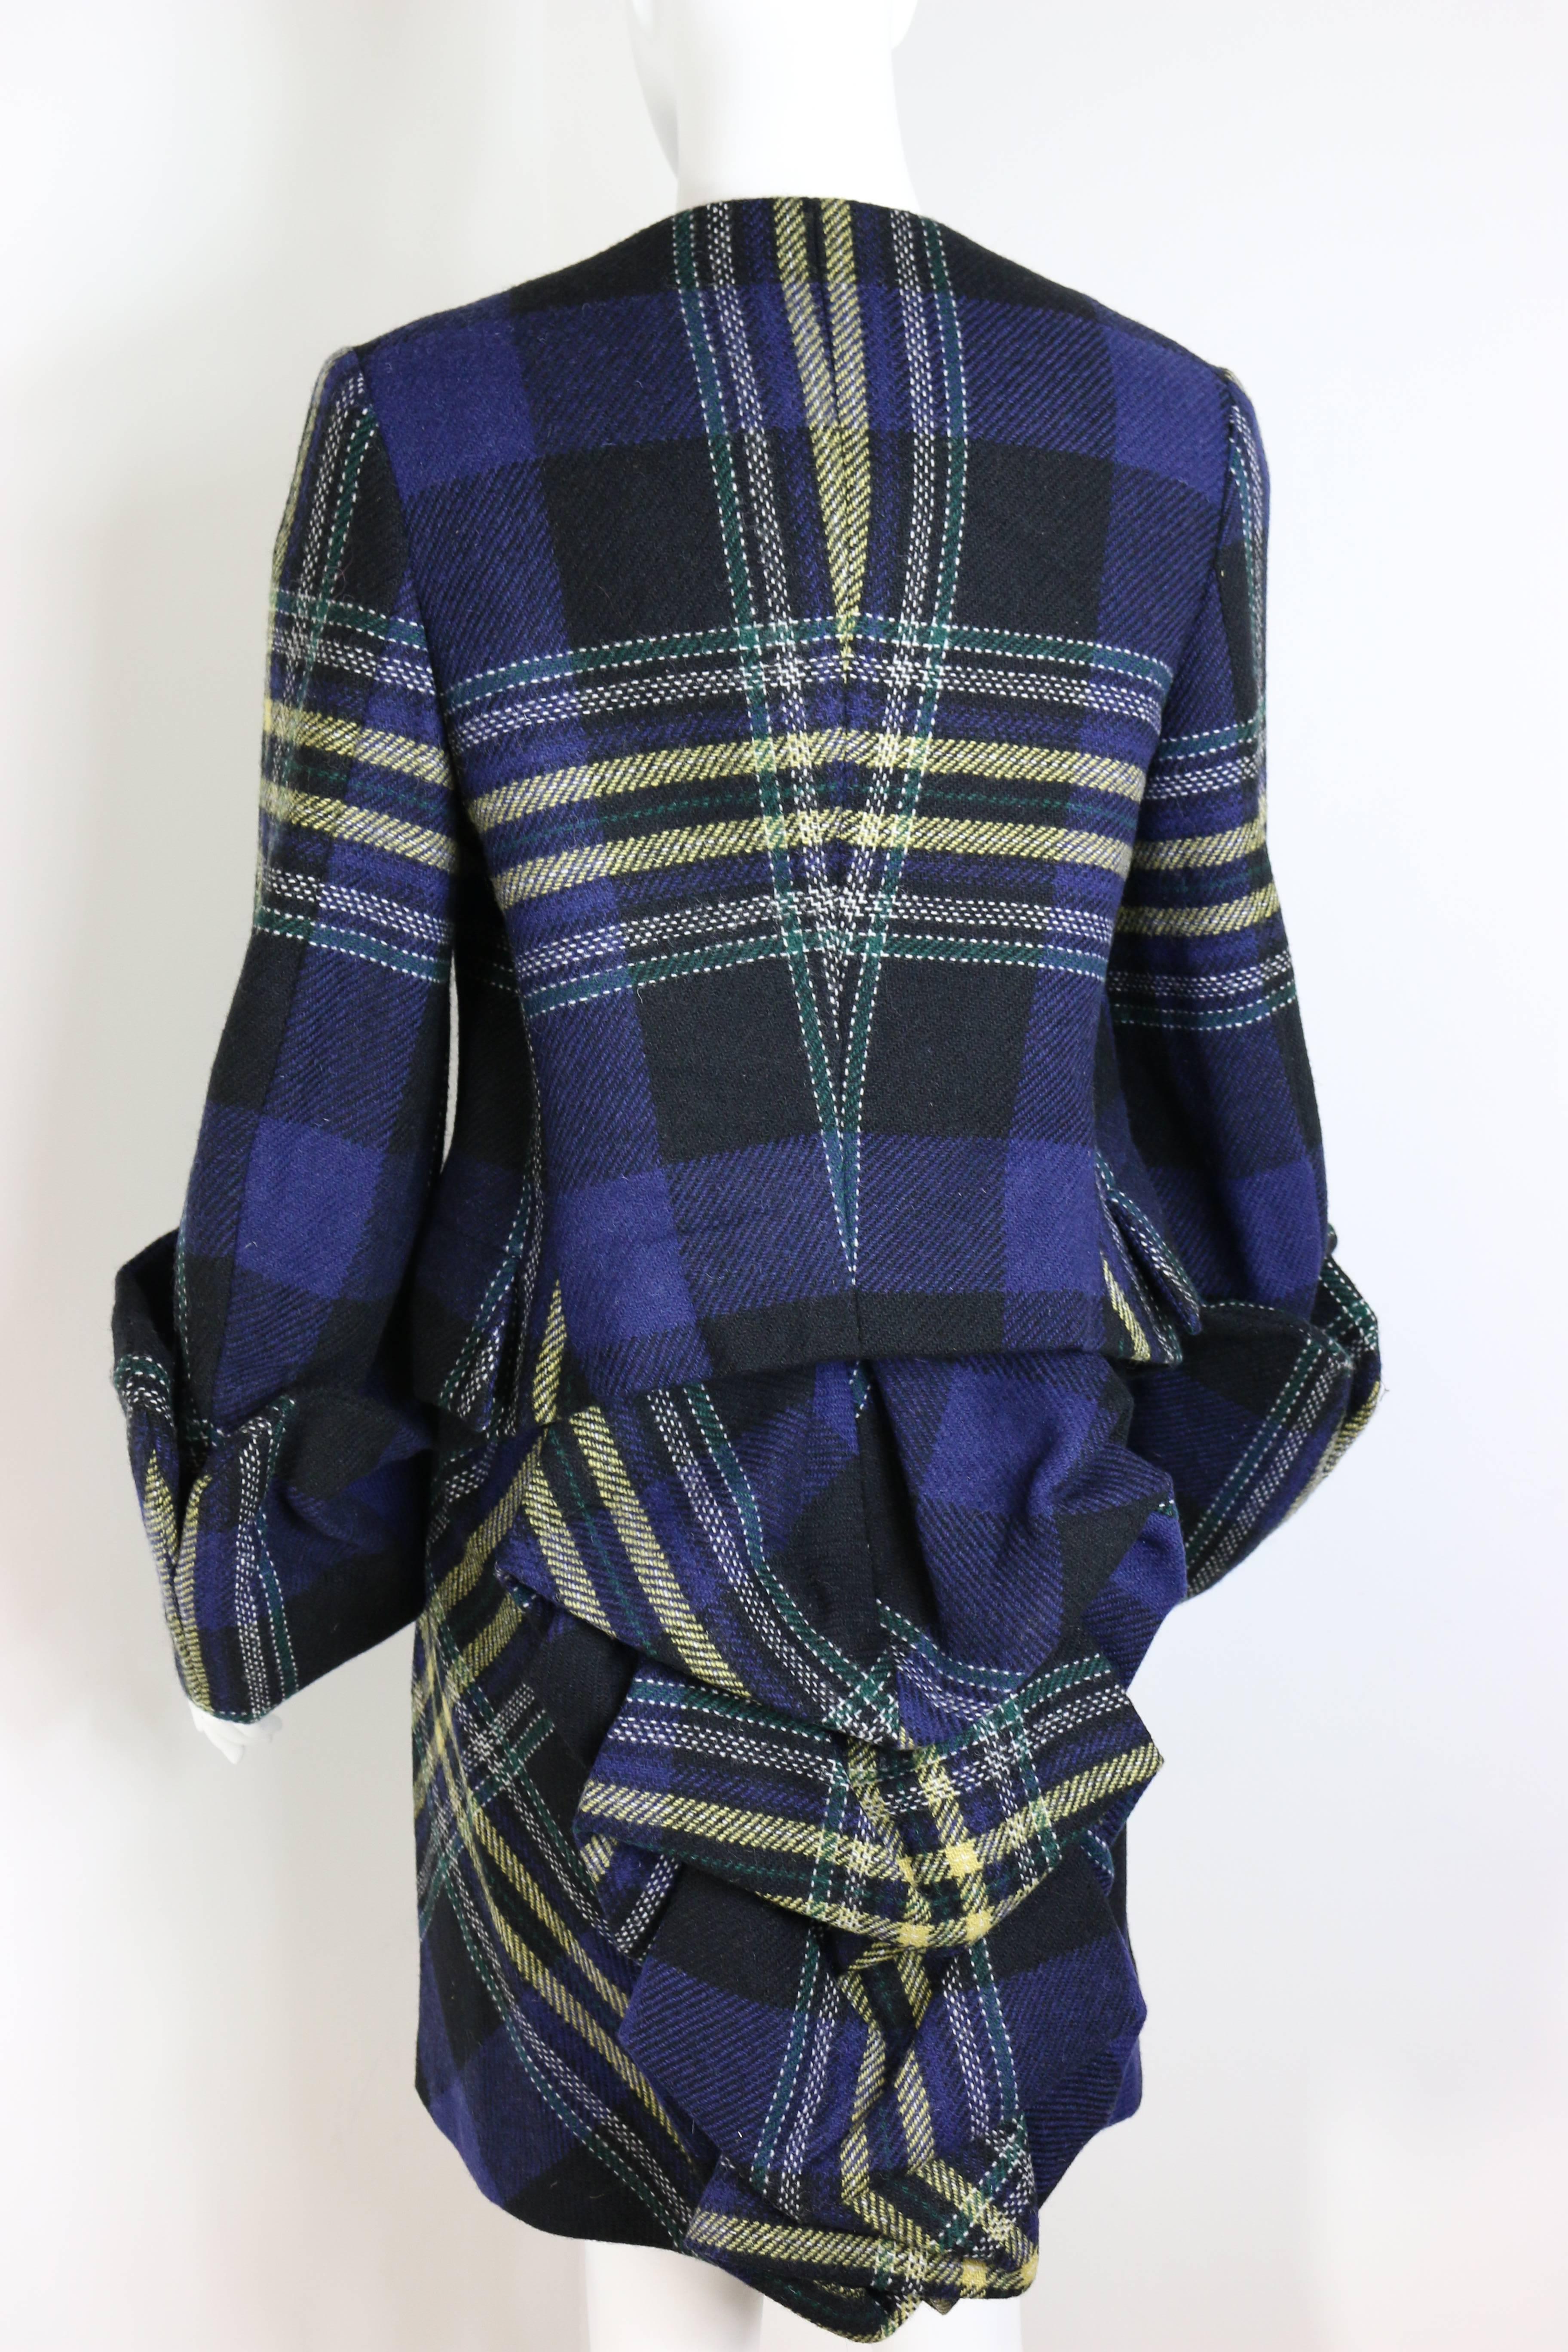 - 90s Vivienne Westwood Navy/White/Yellow/Green wool tartan suit.

- Featuring five iconic Vivienne Westwood logo buttons. 

- Pleated ruffles bustle skirt.  

- Queen of Punk signature suit in the 90s. It is a very collectable item. 

-